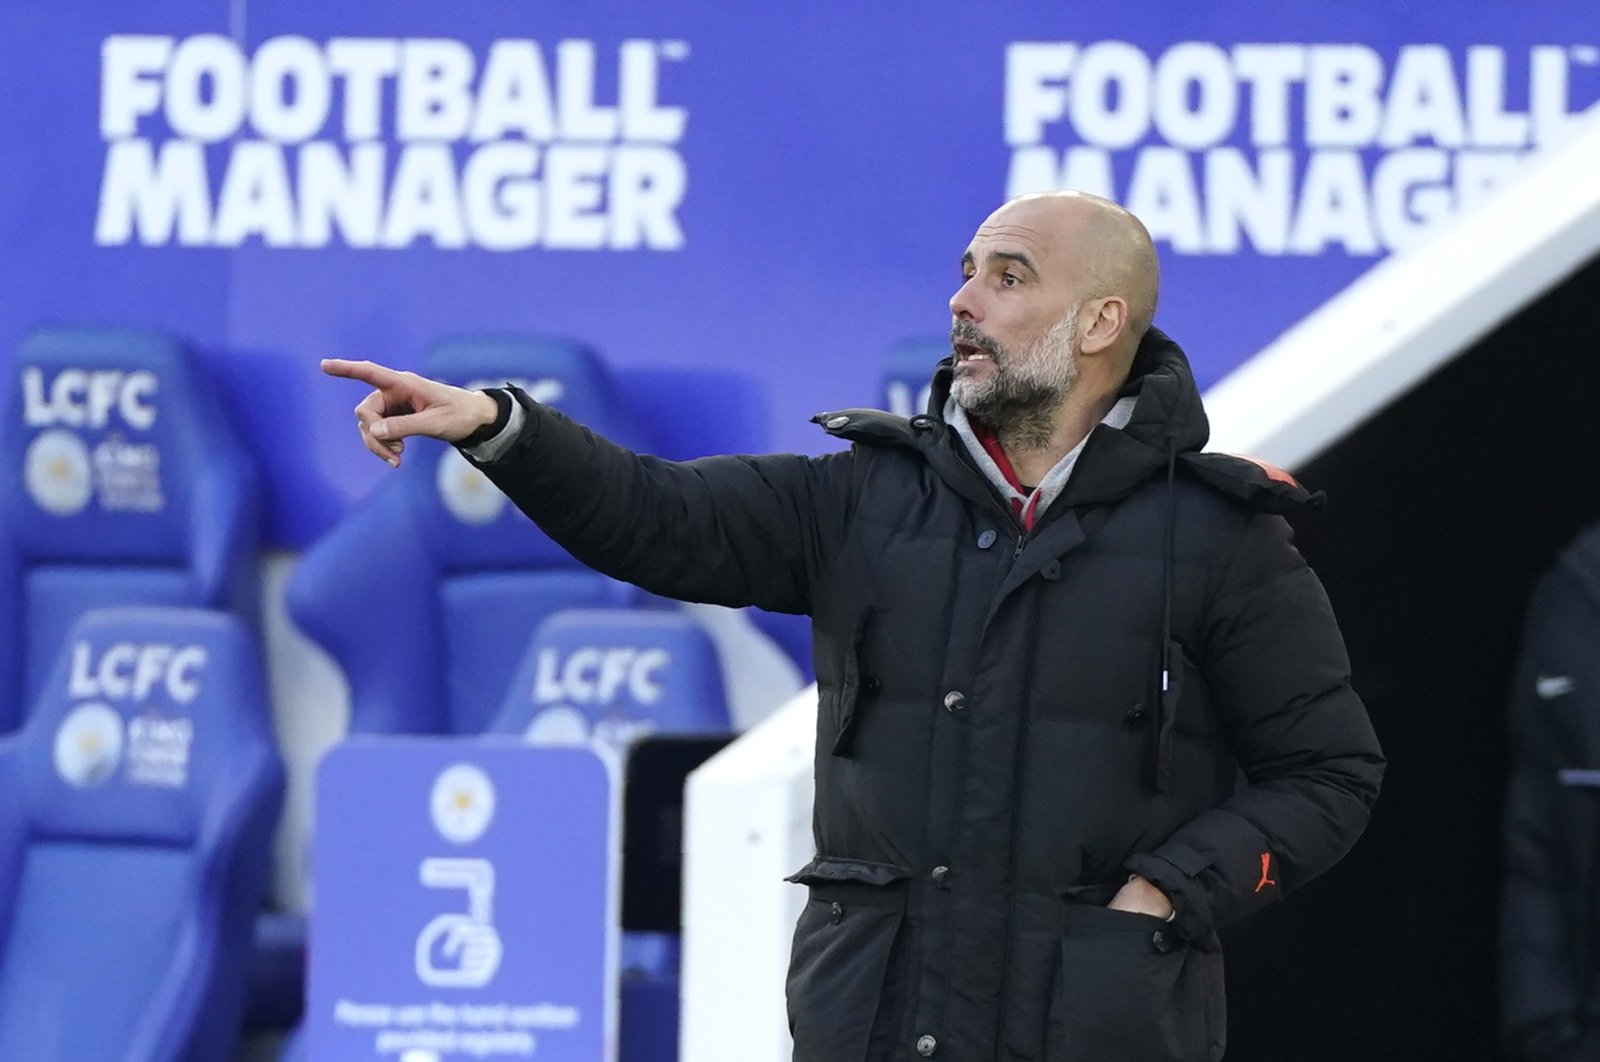 Manchester City manager Pep Guardiola gestures during a Premier League match against Leicester City at the King Power Stadium in Leicester, England, April 3, 2021. (AP Photo)